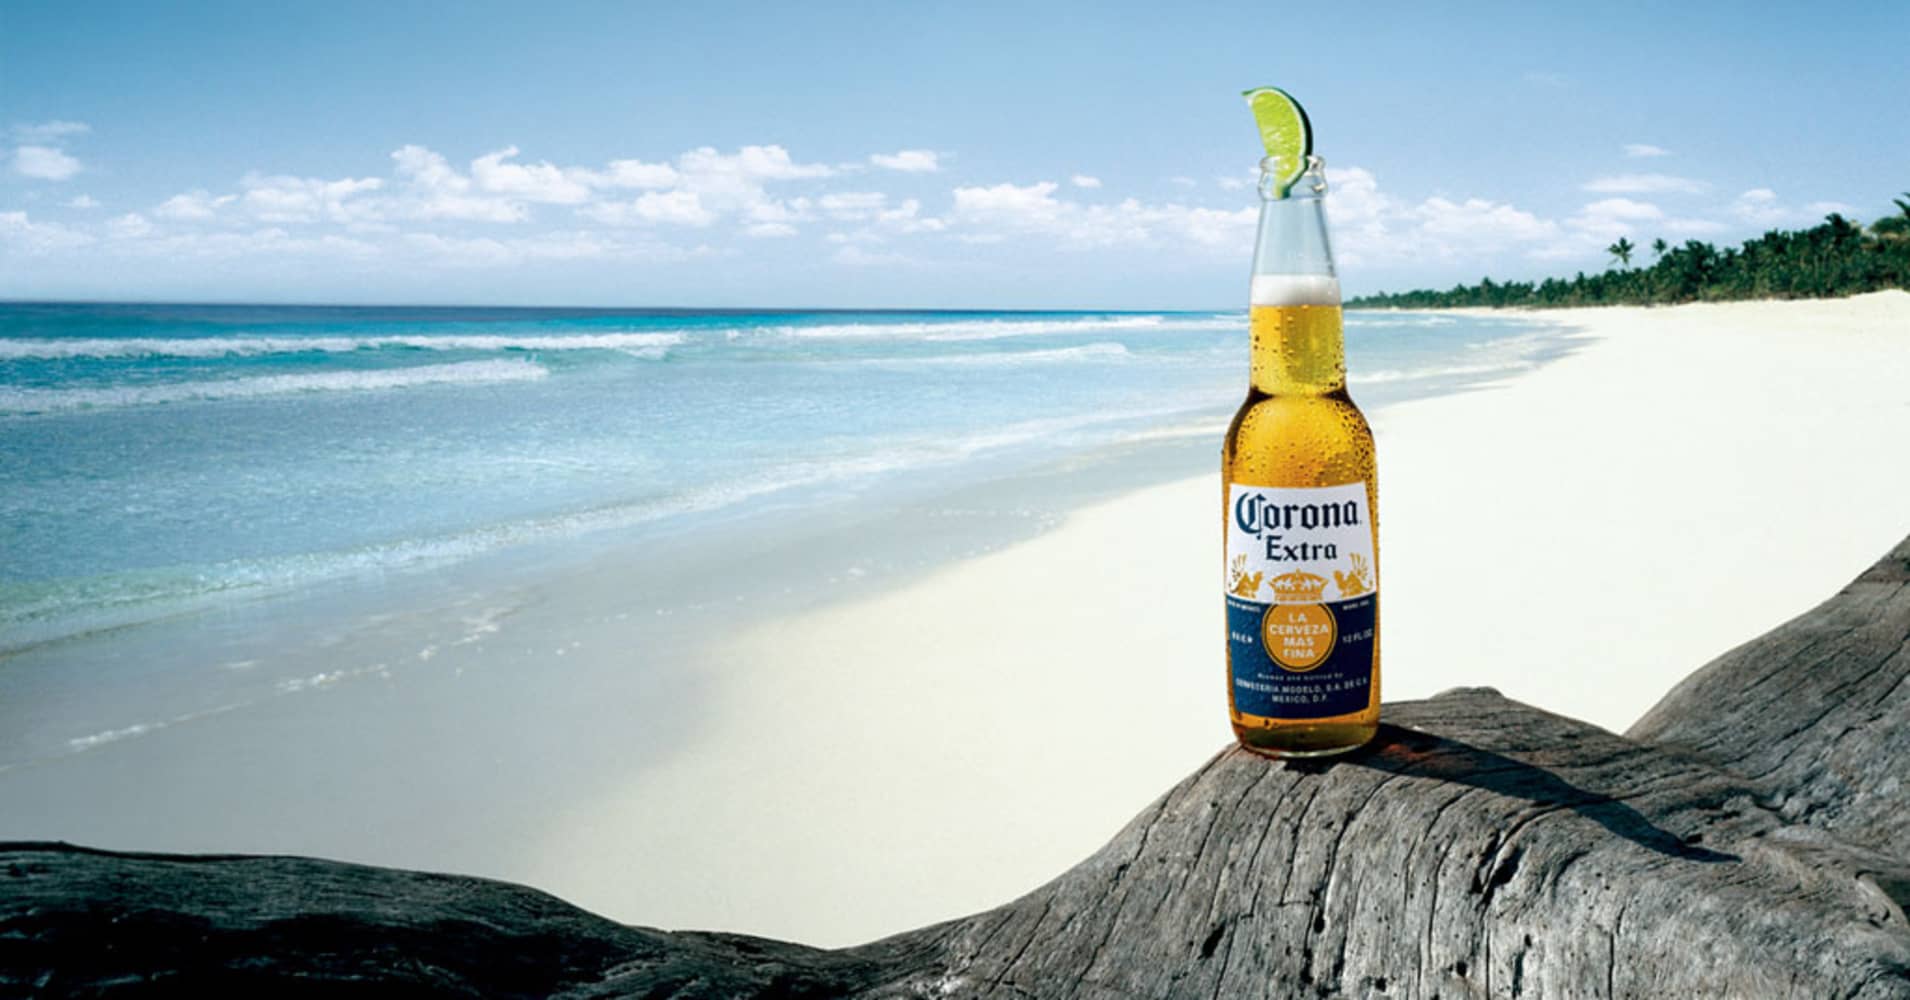 Corona Looks to Keep the Beach Party Going